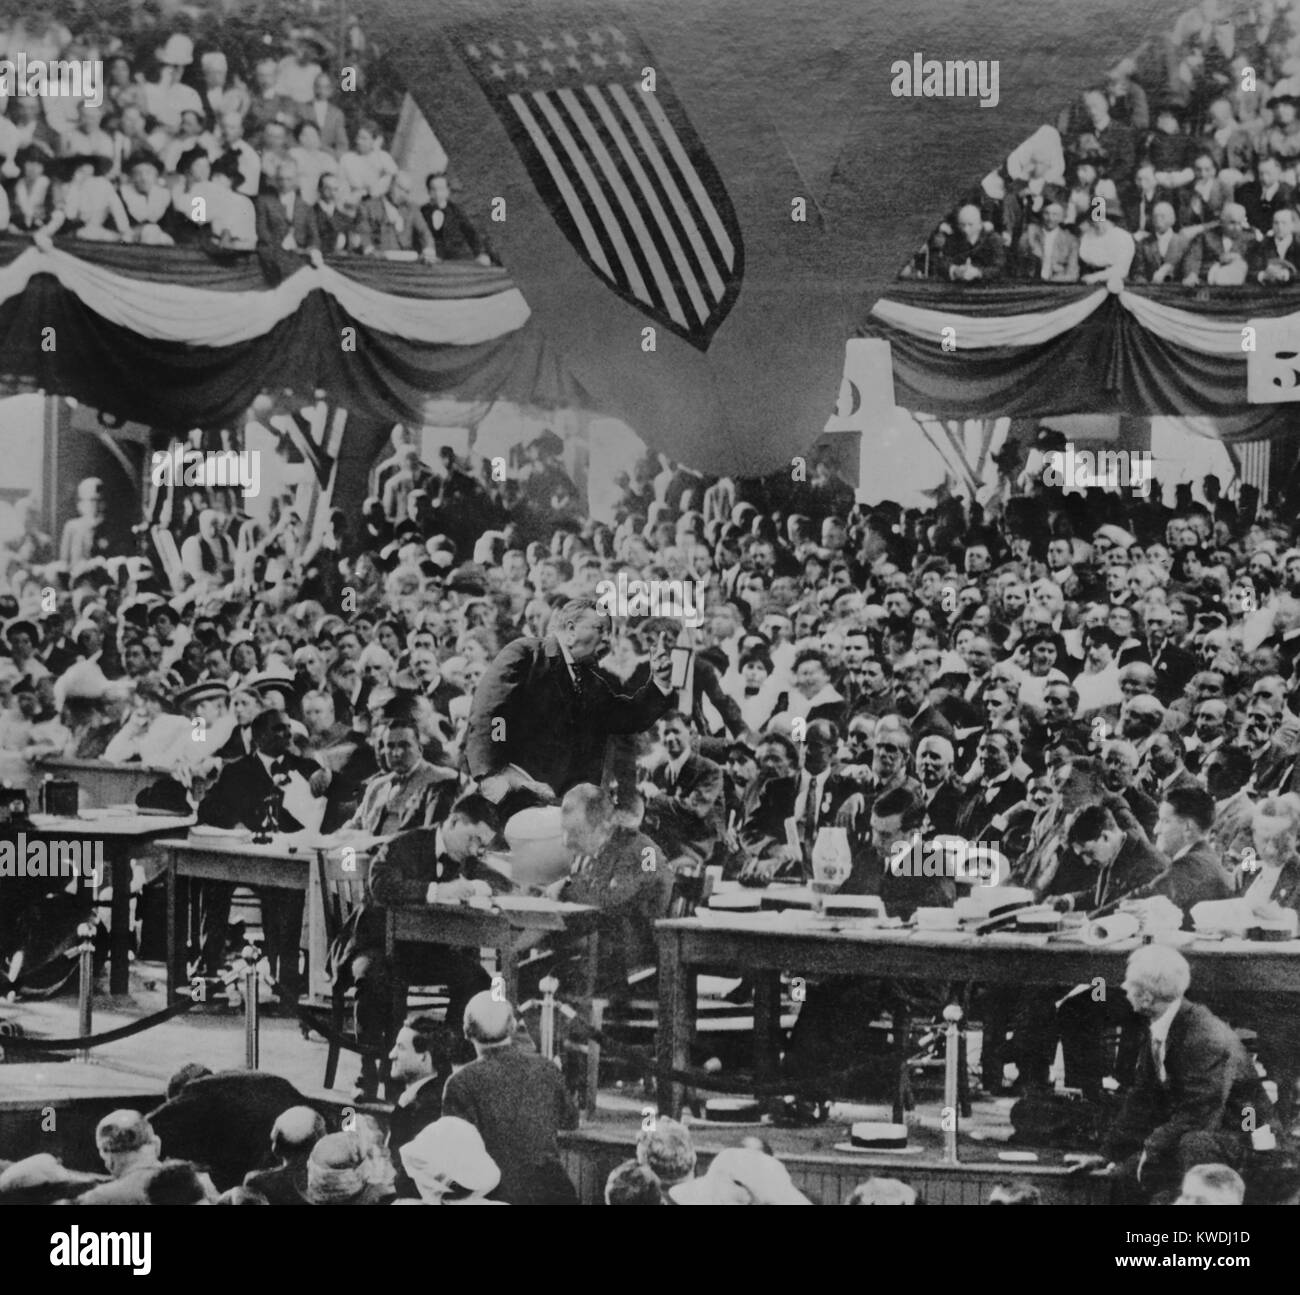 Theodore Roosevelt addressing the Progressive National Convention, August 6, 1912. He gave a 2 hour speech in which he attacked both the Republican and Democratic parties as undemocratic (BSLOC 2017 8 50) Stock Photo